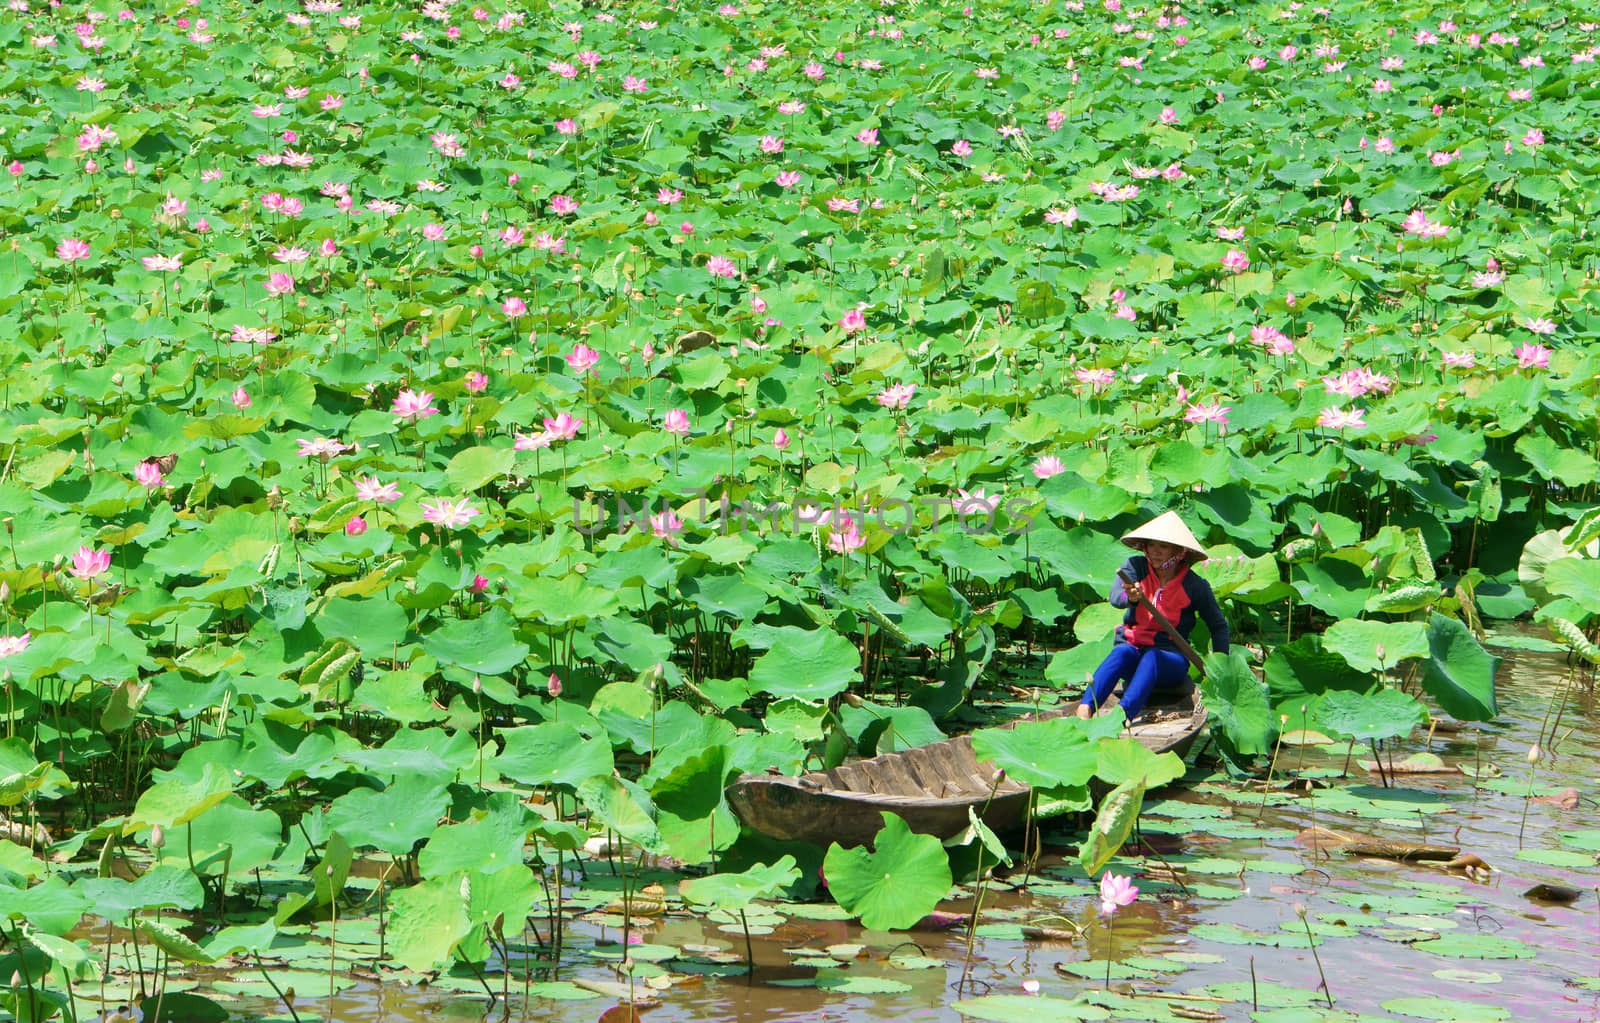 Beautiful landscaping of Vietnamese village, woman rowing the row boat to pick lotus flower on waterlilly pond, large aquatic flora lake in green leaf, pink flower make amazing scene at Mekong Delta